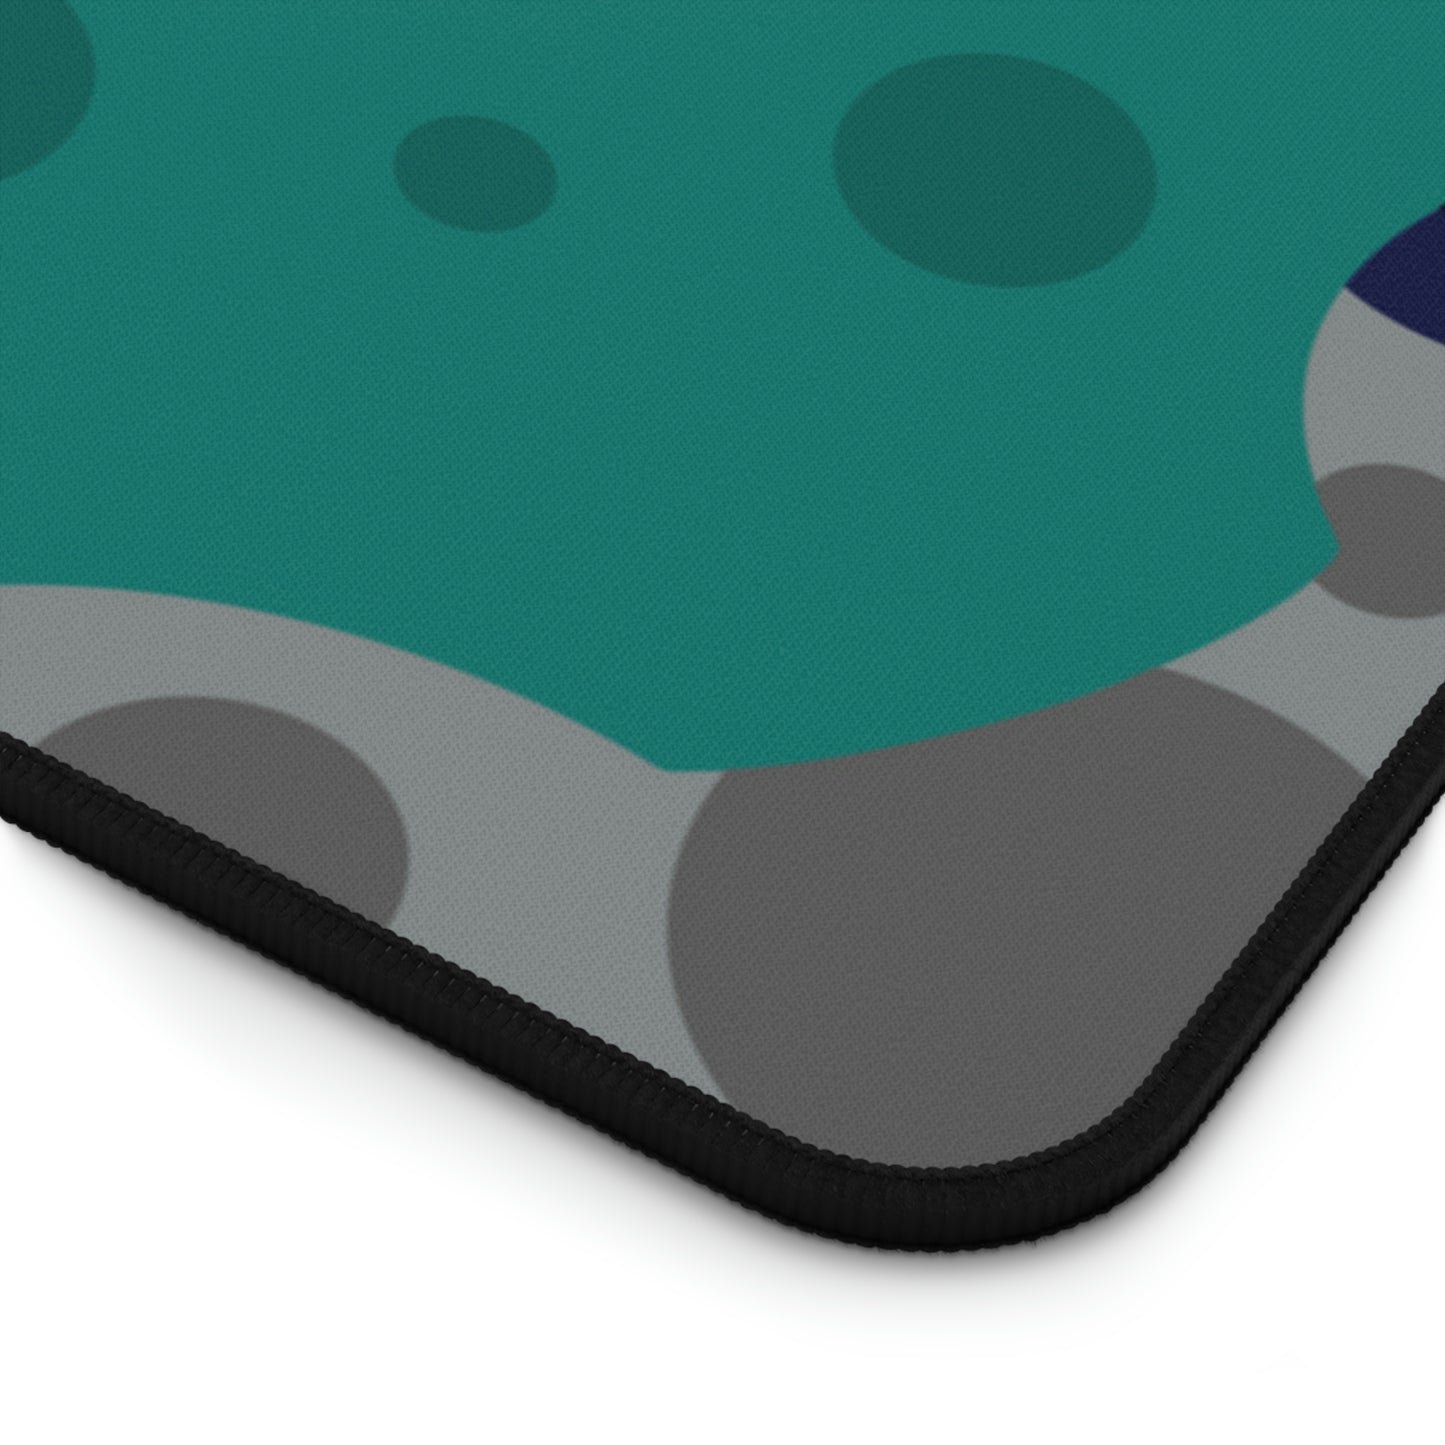 The corner of a 31" x 15.5" desk mat with gray, teal, and dark blue meteorites.